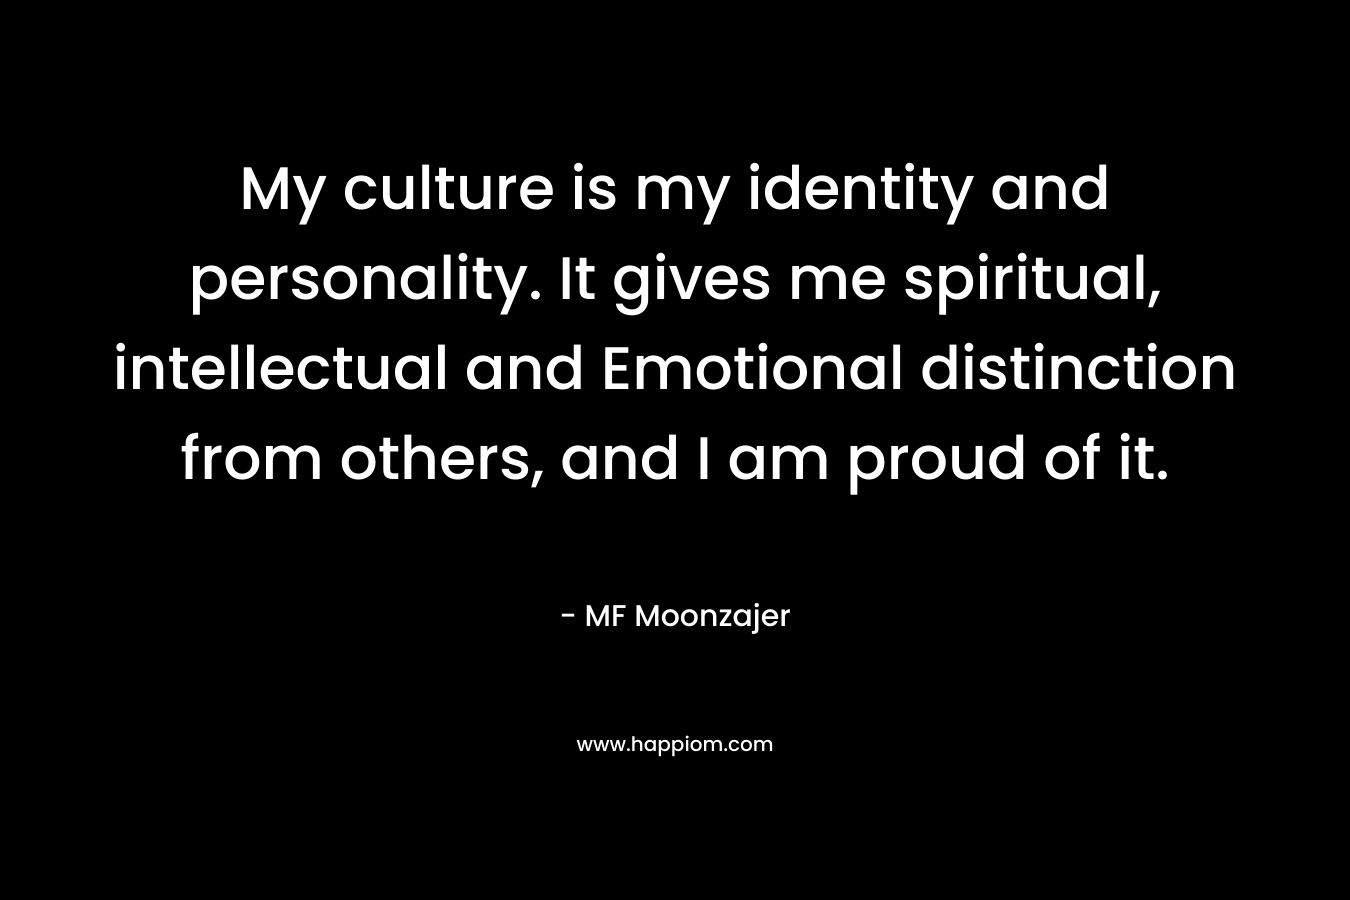 My culture is my identity and personality. It gives me spiritual, intellectual and Emotional distinction from others, and I am proud of it.